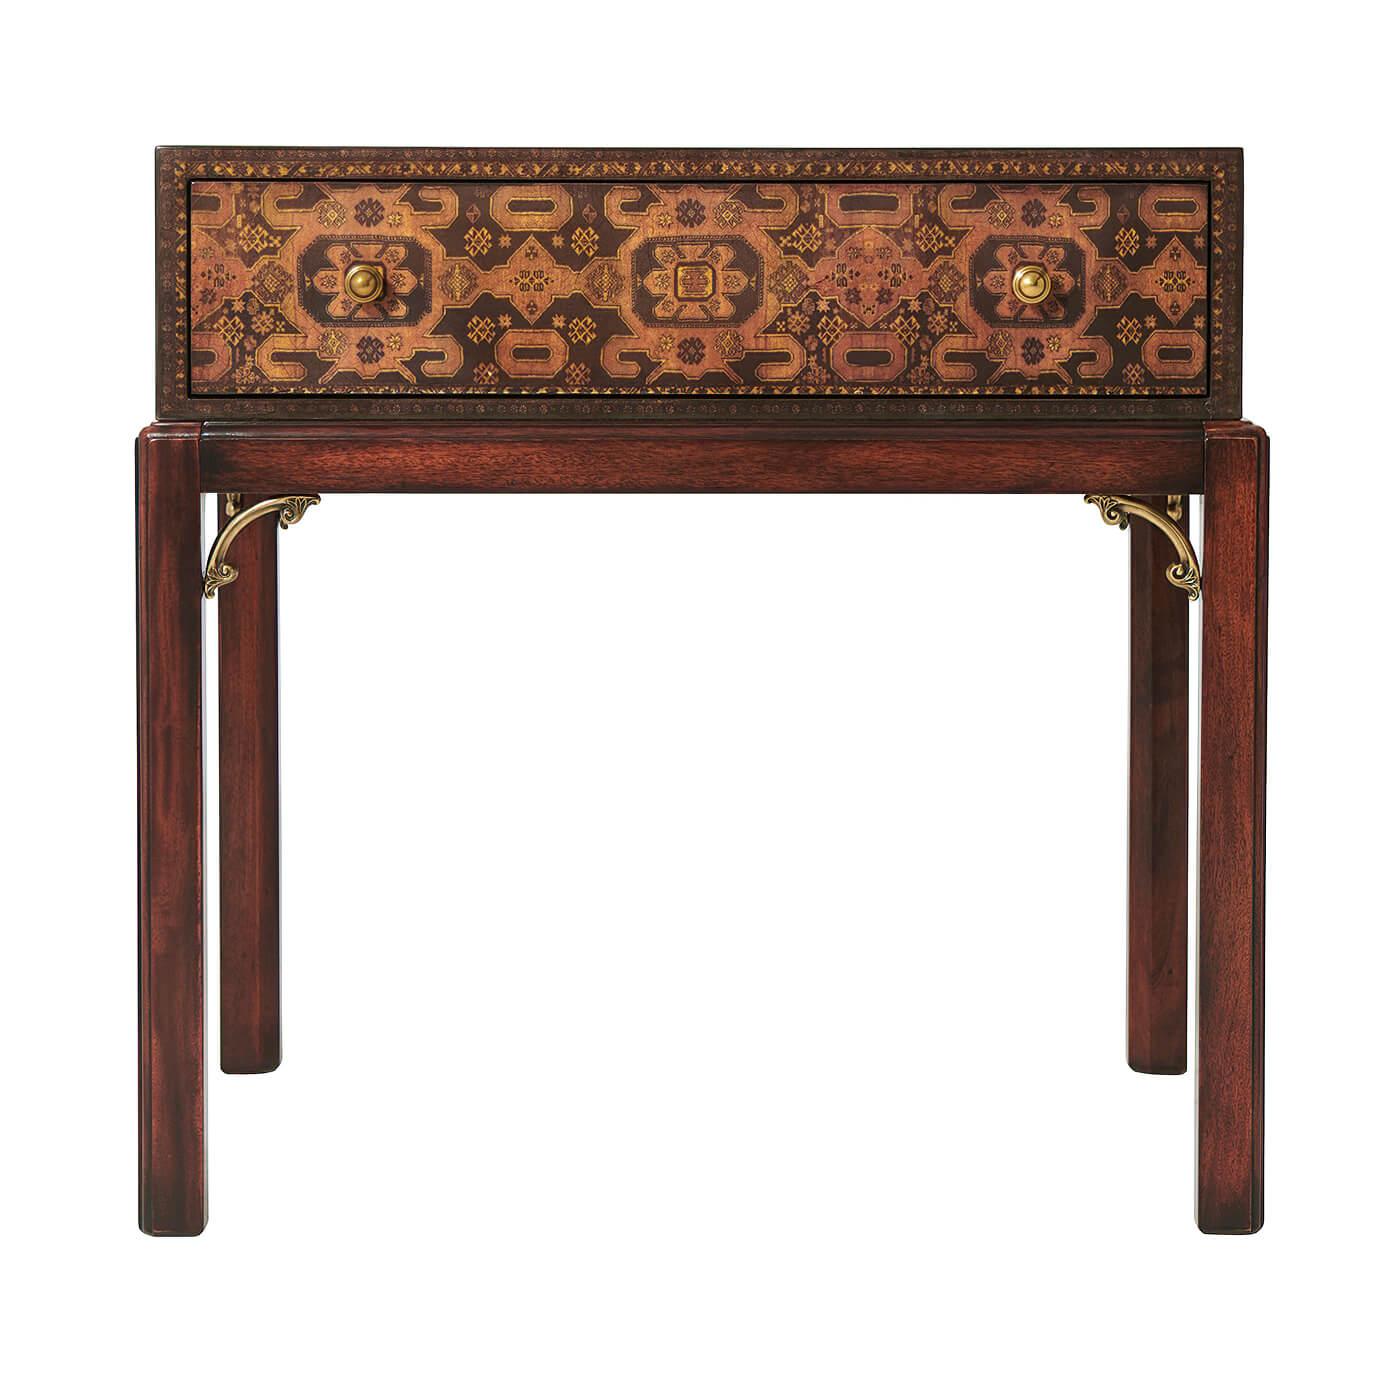 A carpet decoupage end table, with a frieze drawer on square chamfered legs. The original George III.

Dimensions: 25